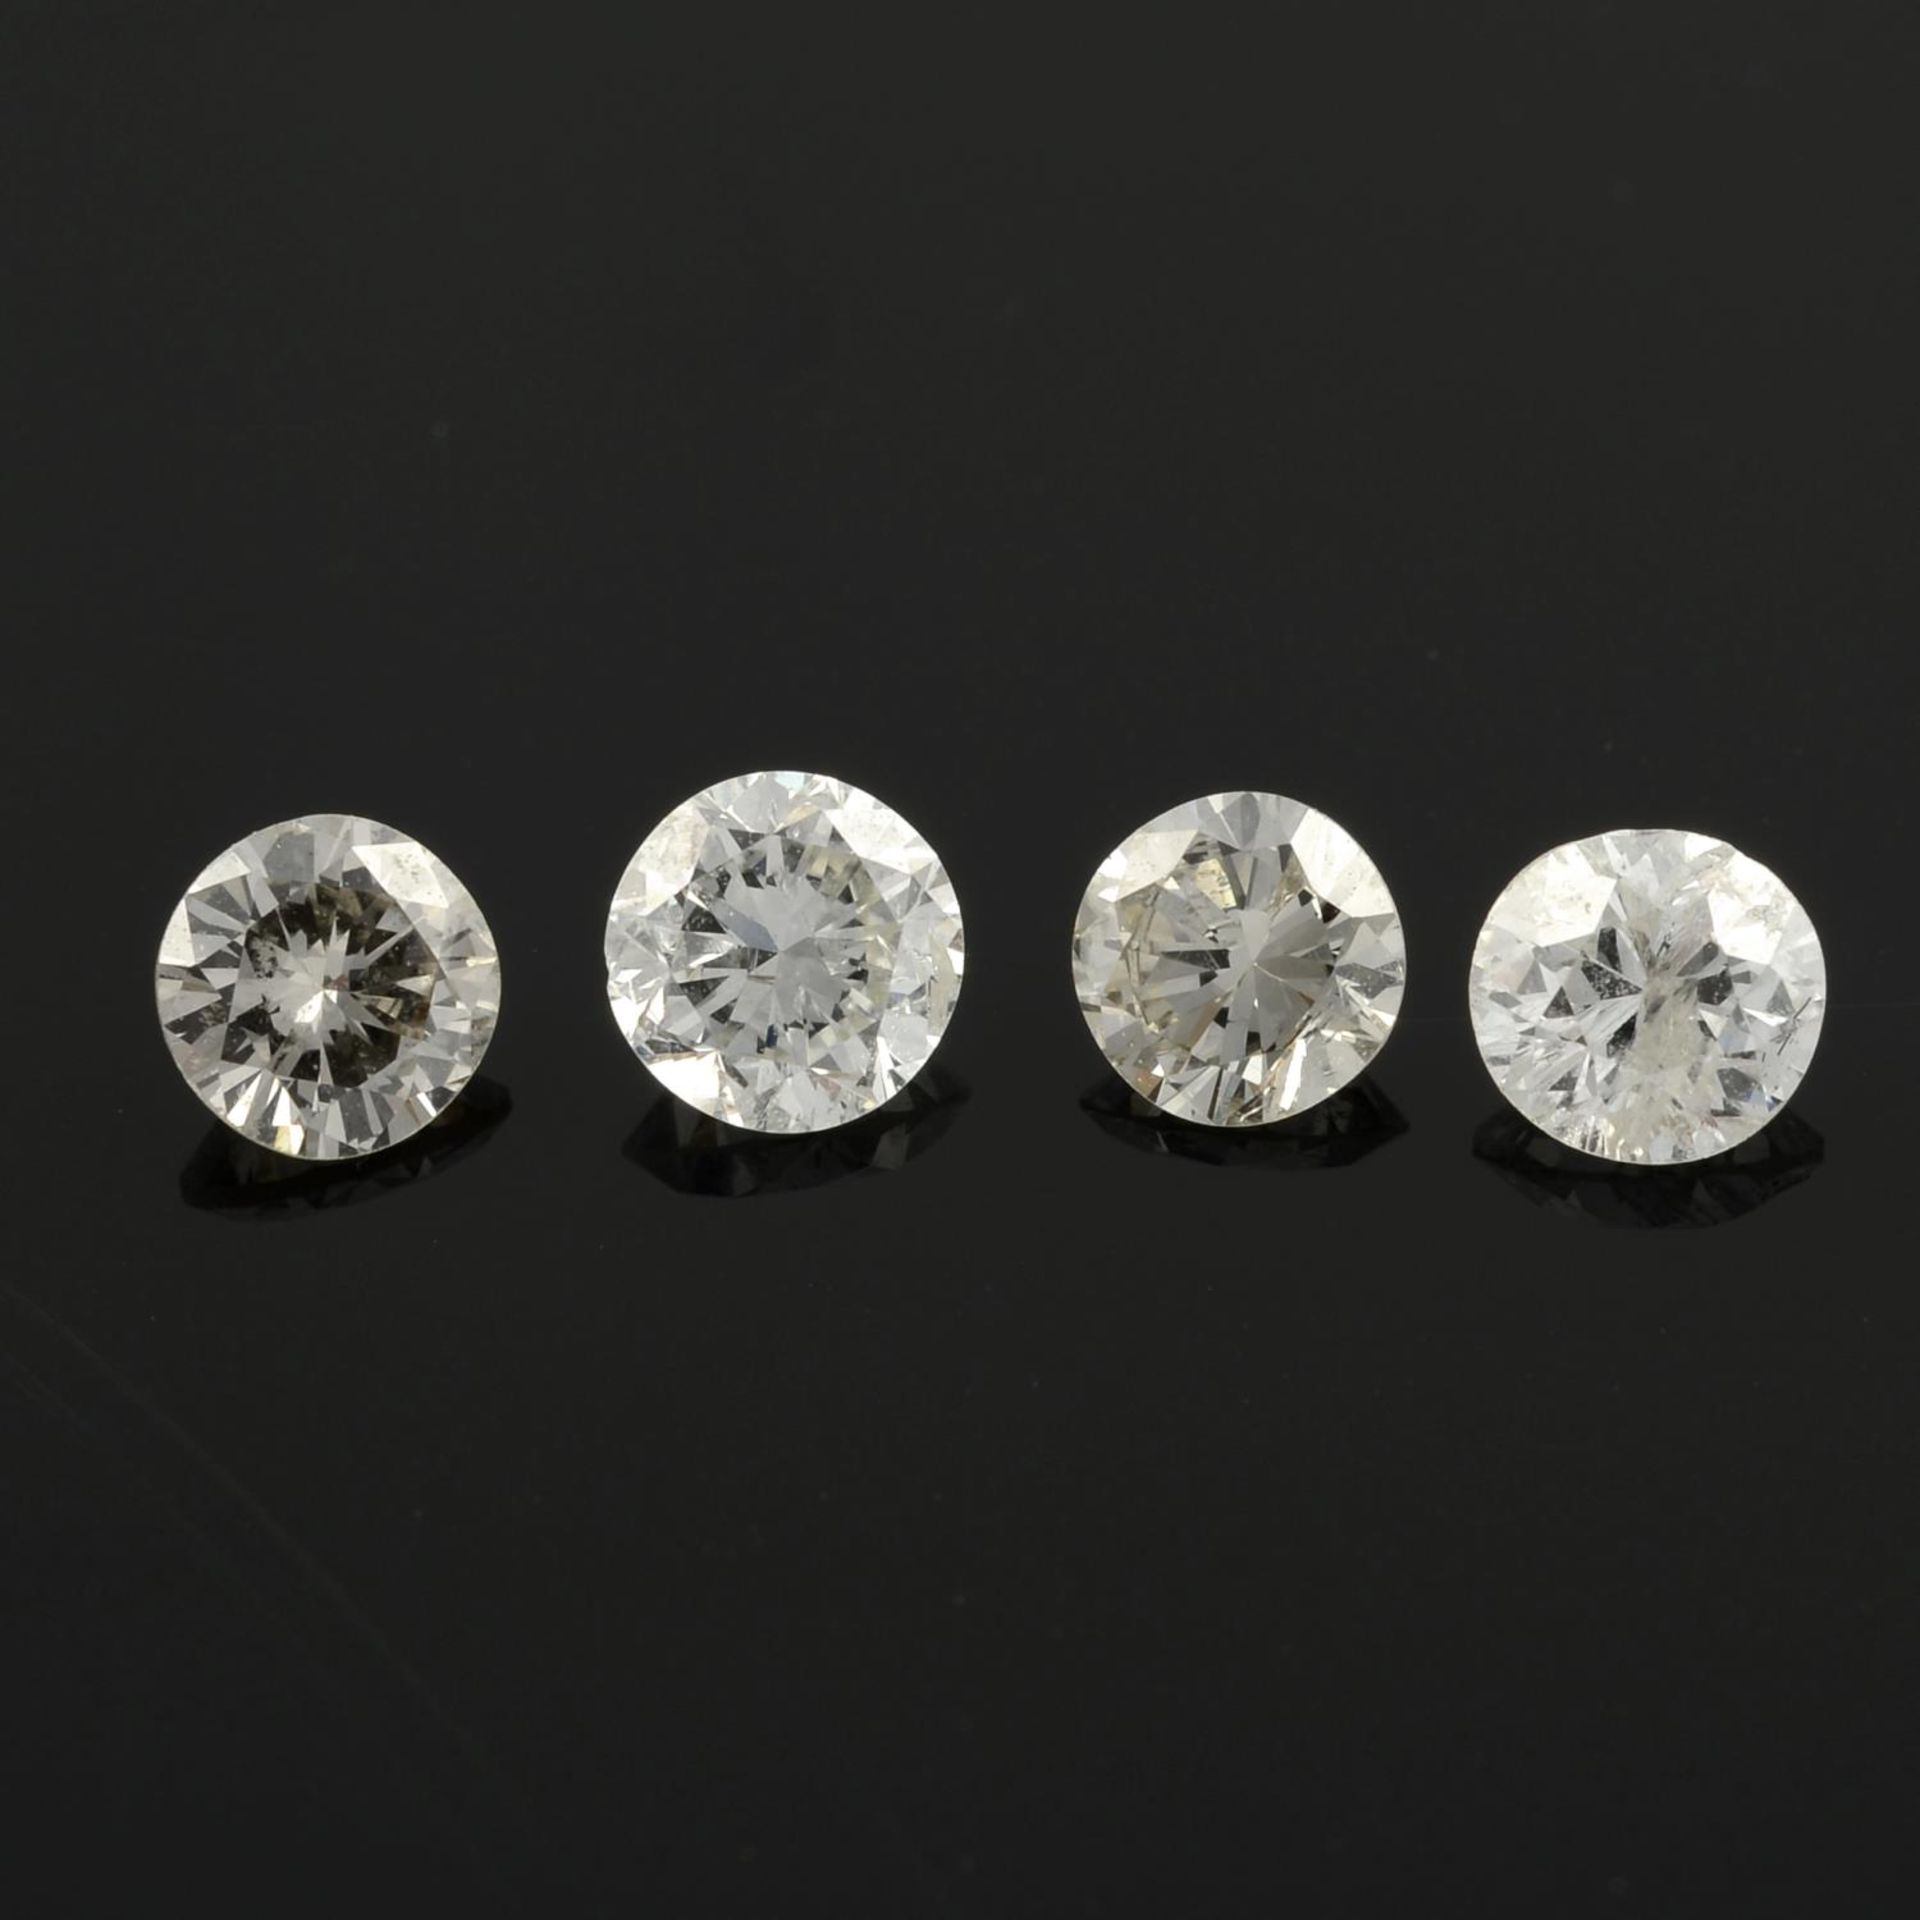 Selection of brilliant cut diamonds, estimated total weight 2.82cts.